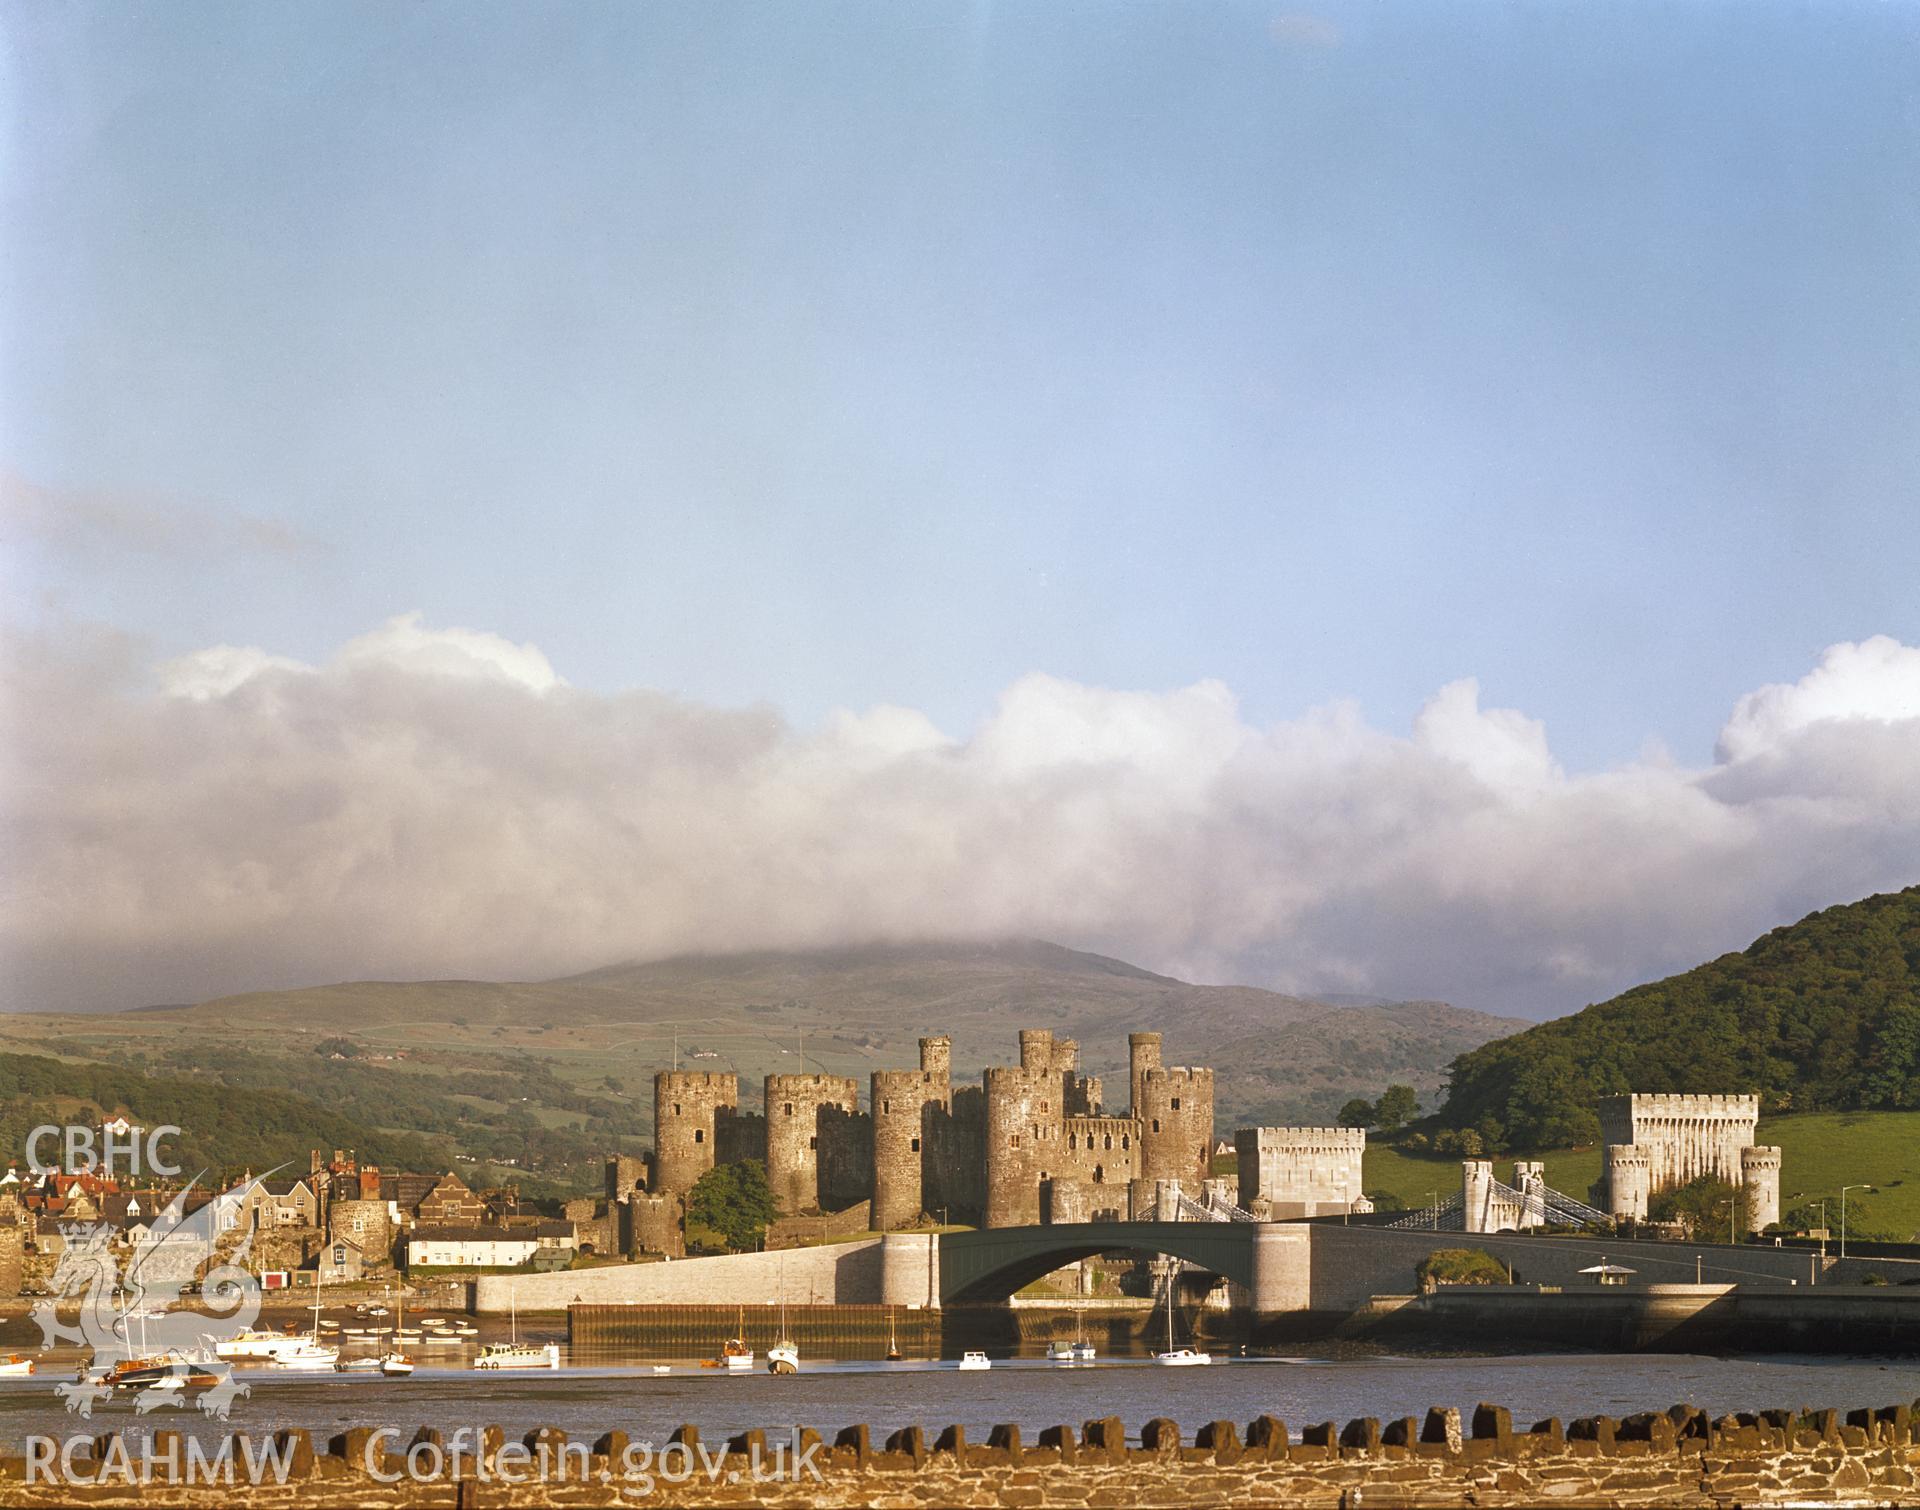 Photographic colour negative showing view of Conwy castle; collated by the former Central Office of Information.